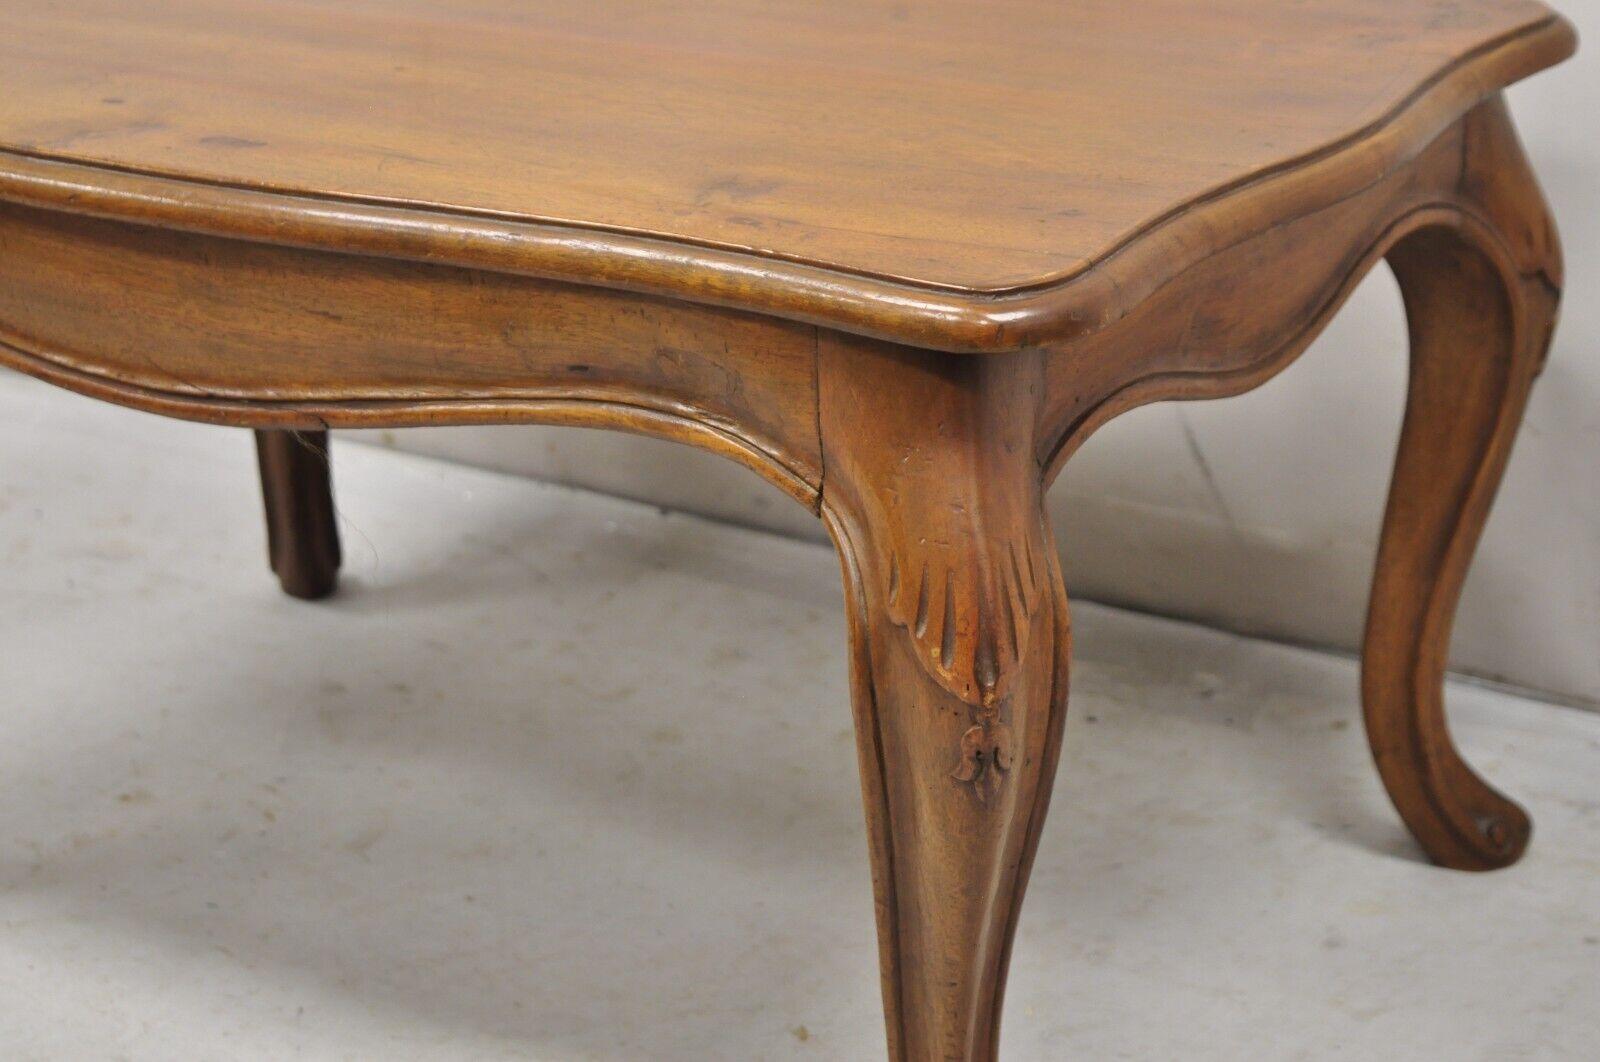 Vintage Italian Provincial Antiqued Walnut Small Cabriole Leg Coffee Table For Sale 2